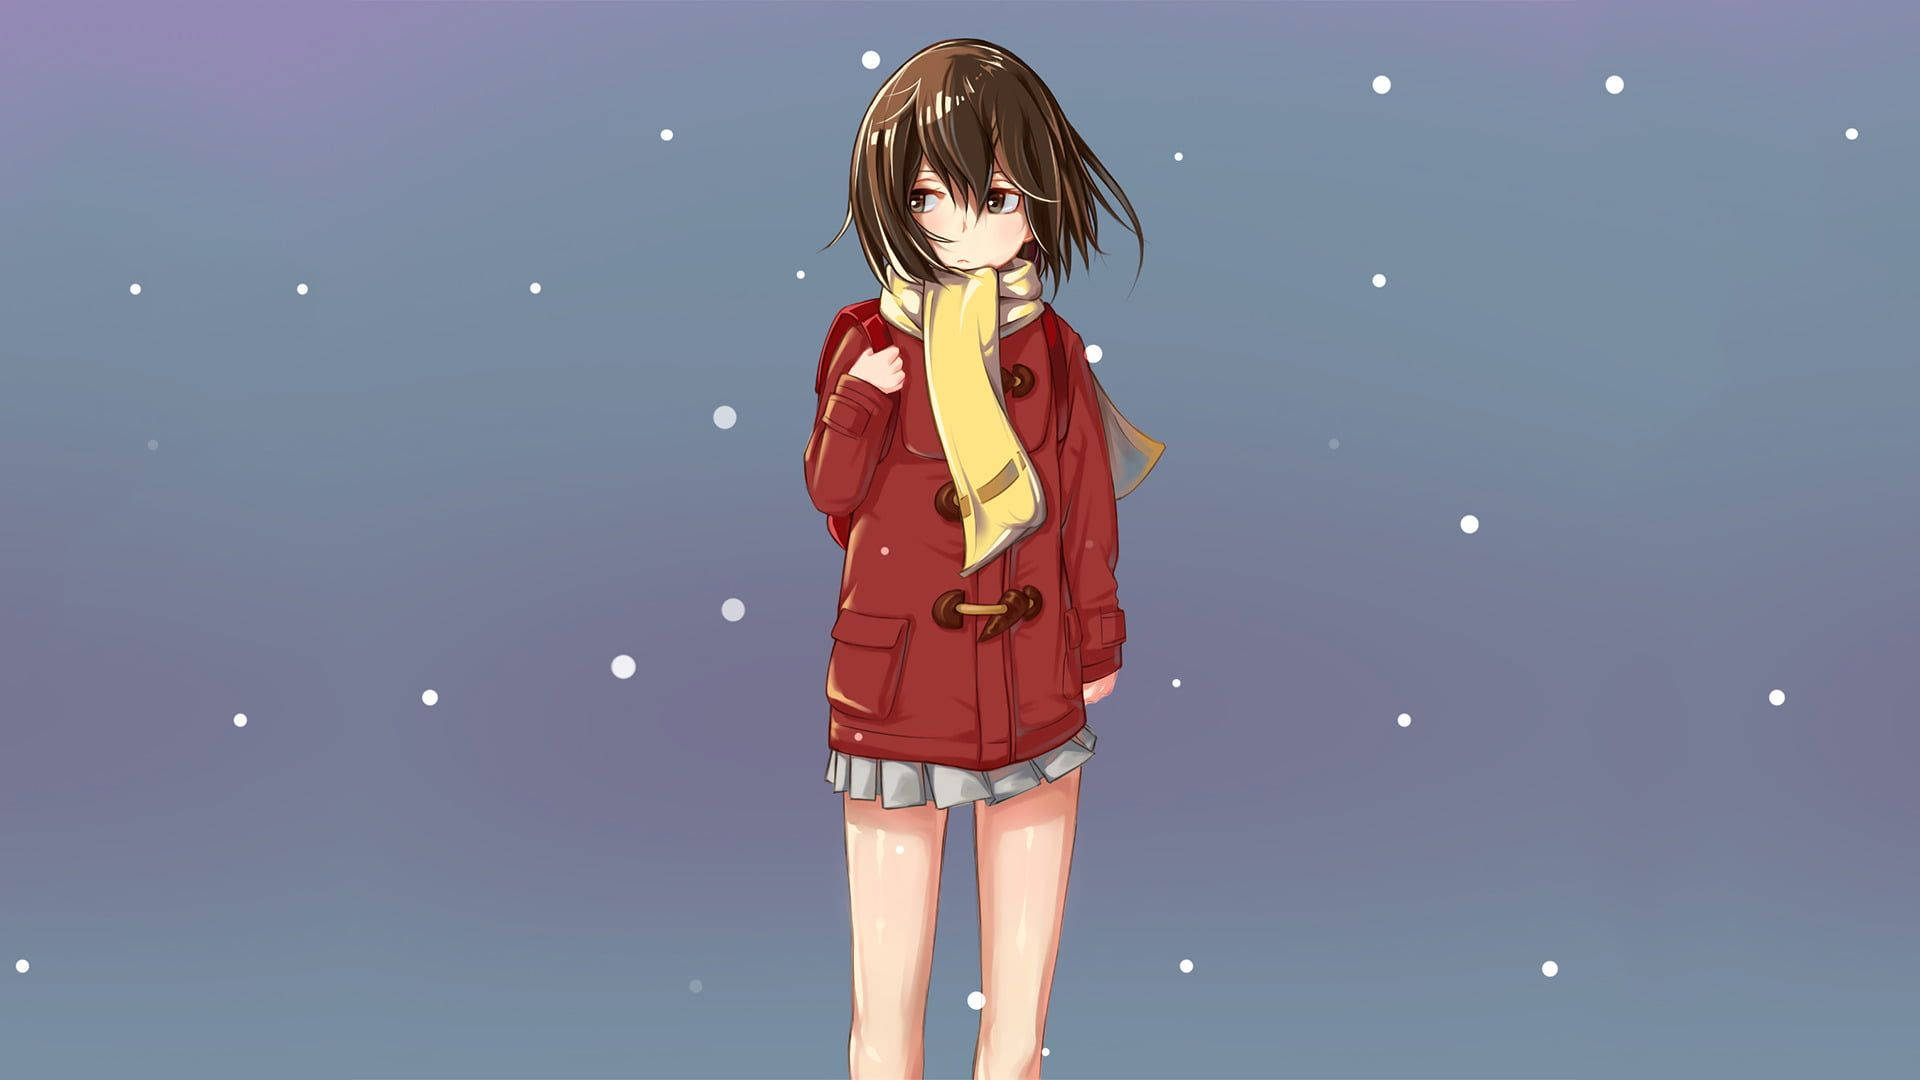 Female Character In Erased Film Background